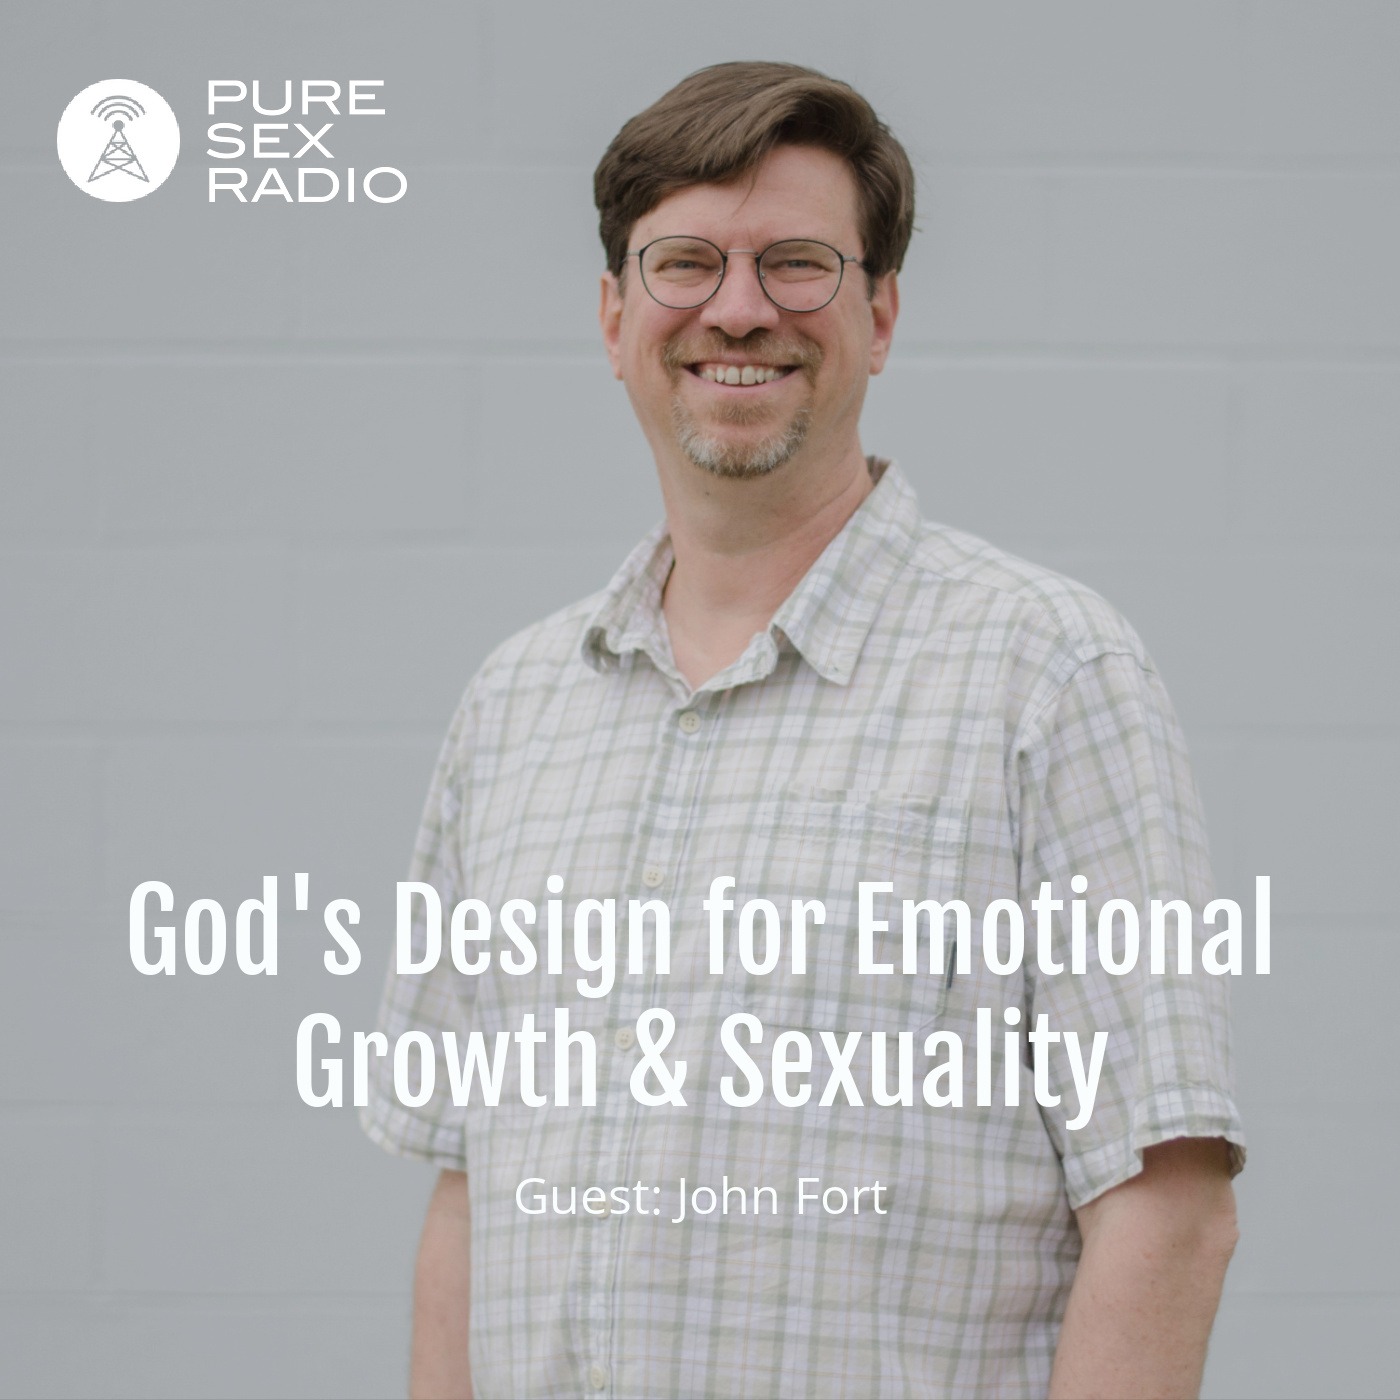 God's Design for Emotional Growth & Sexuality